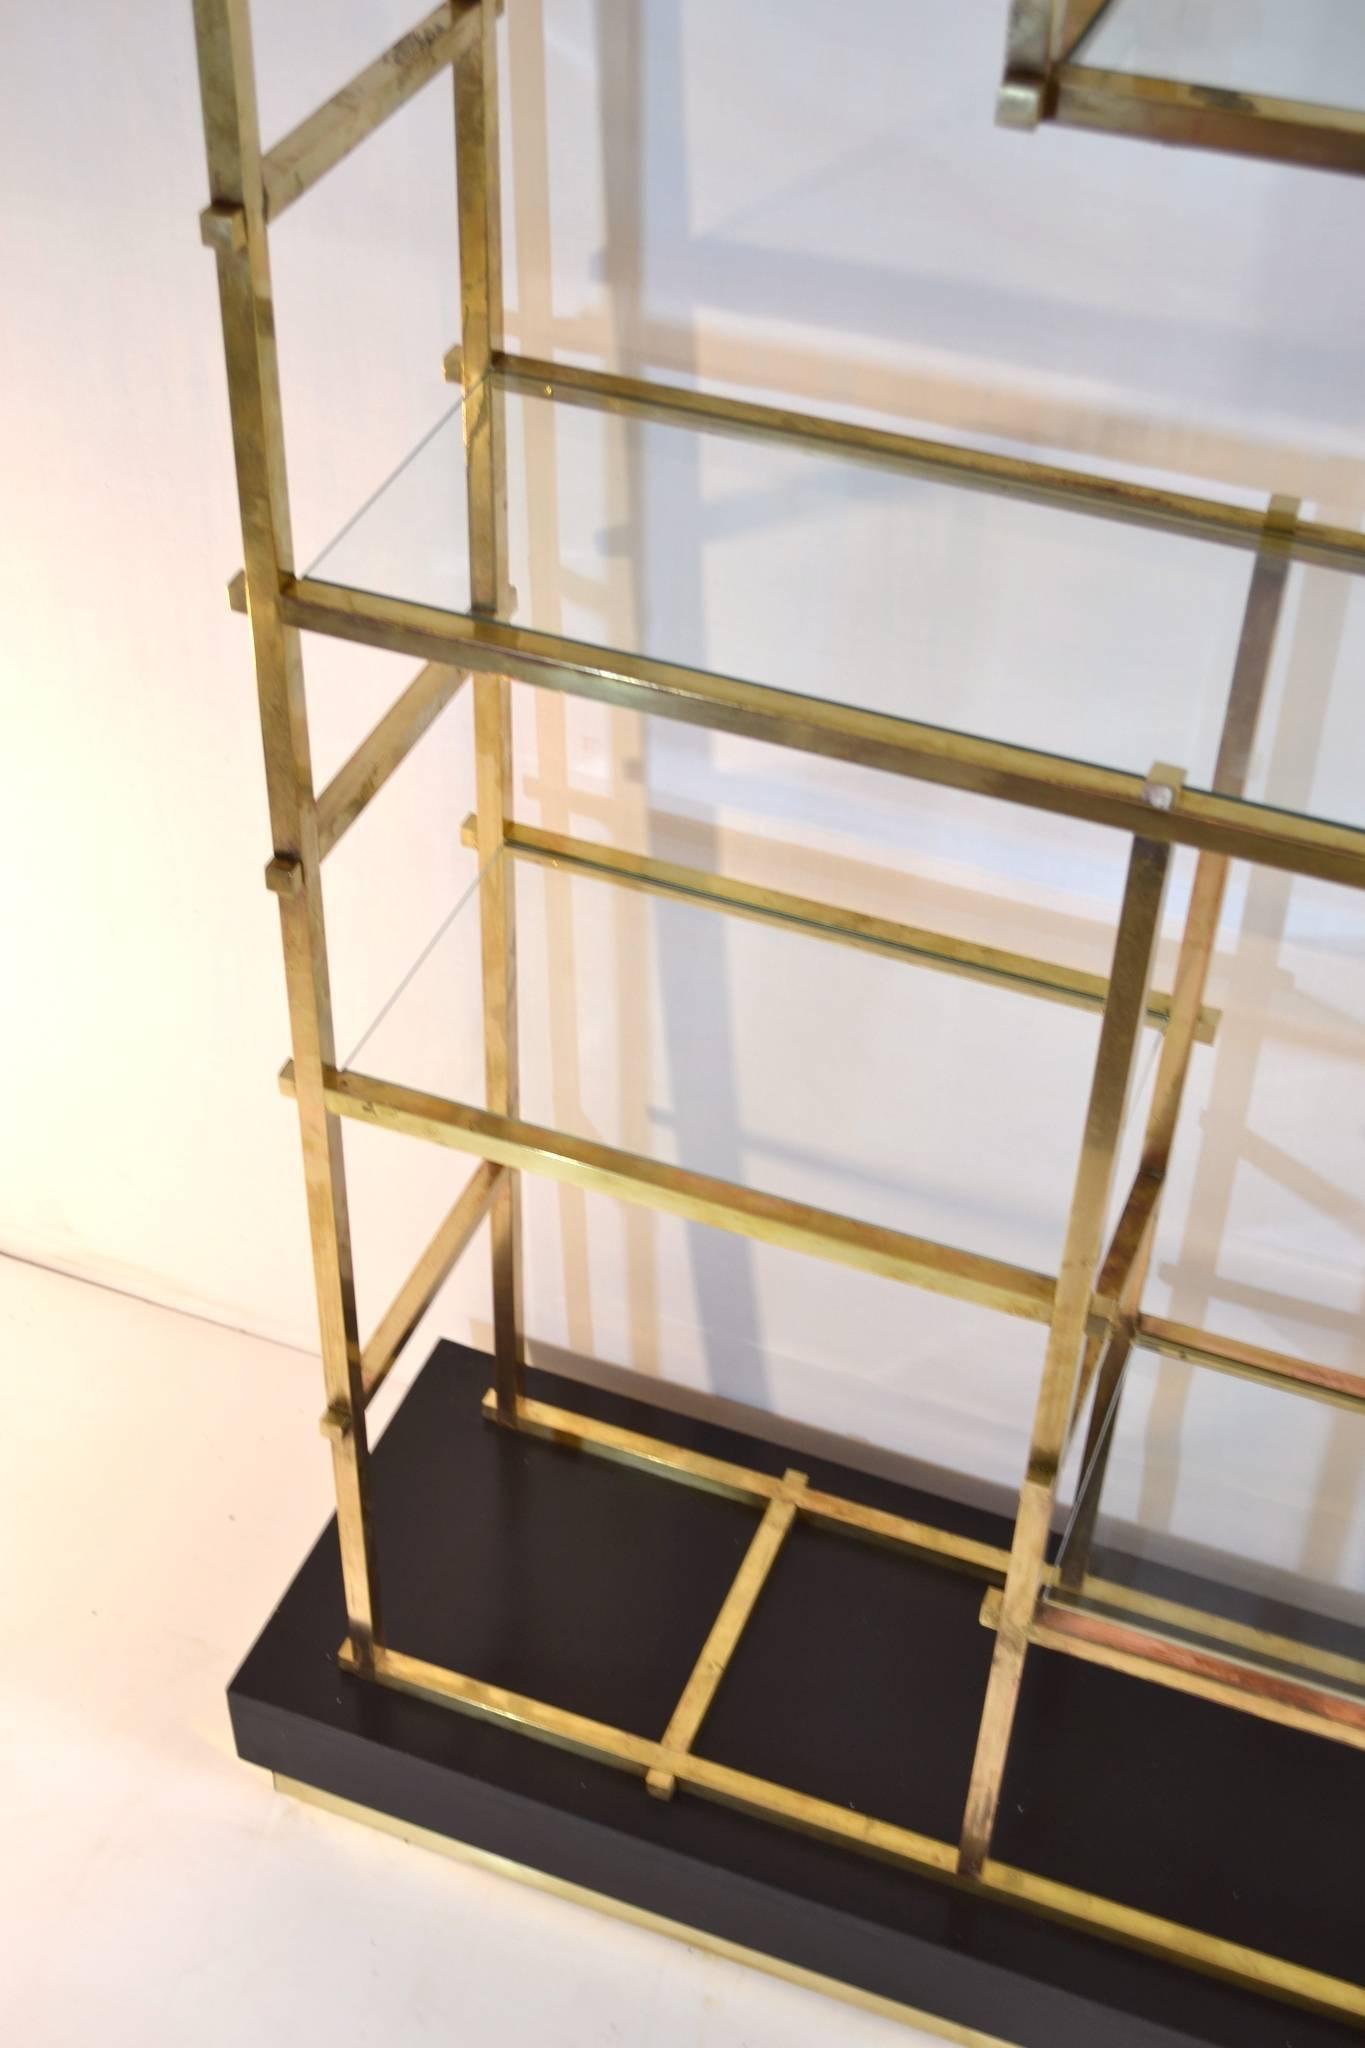 Super stylish shelf/étagère´ in brass with clear glass shelves standing on a black wood base with brass trimming. The shelf is very characteristic and held together with large square brass bolts throughout. Stabile and sound condition. The